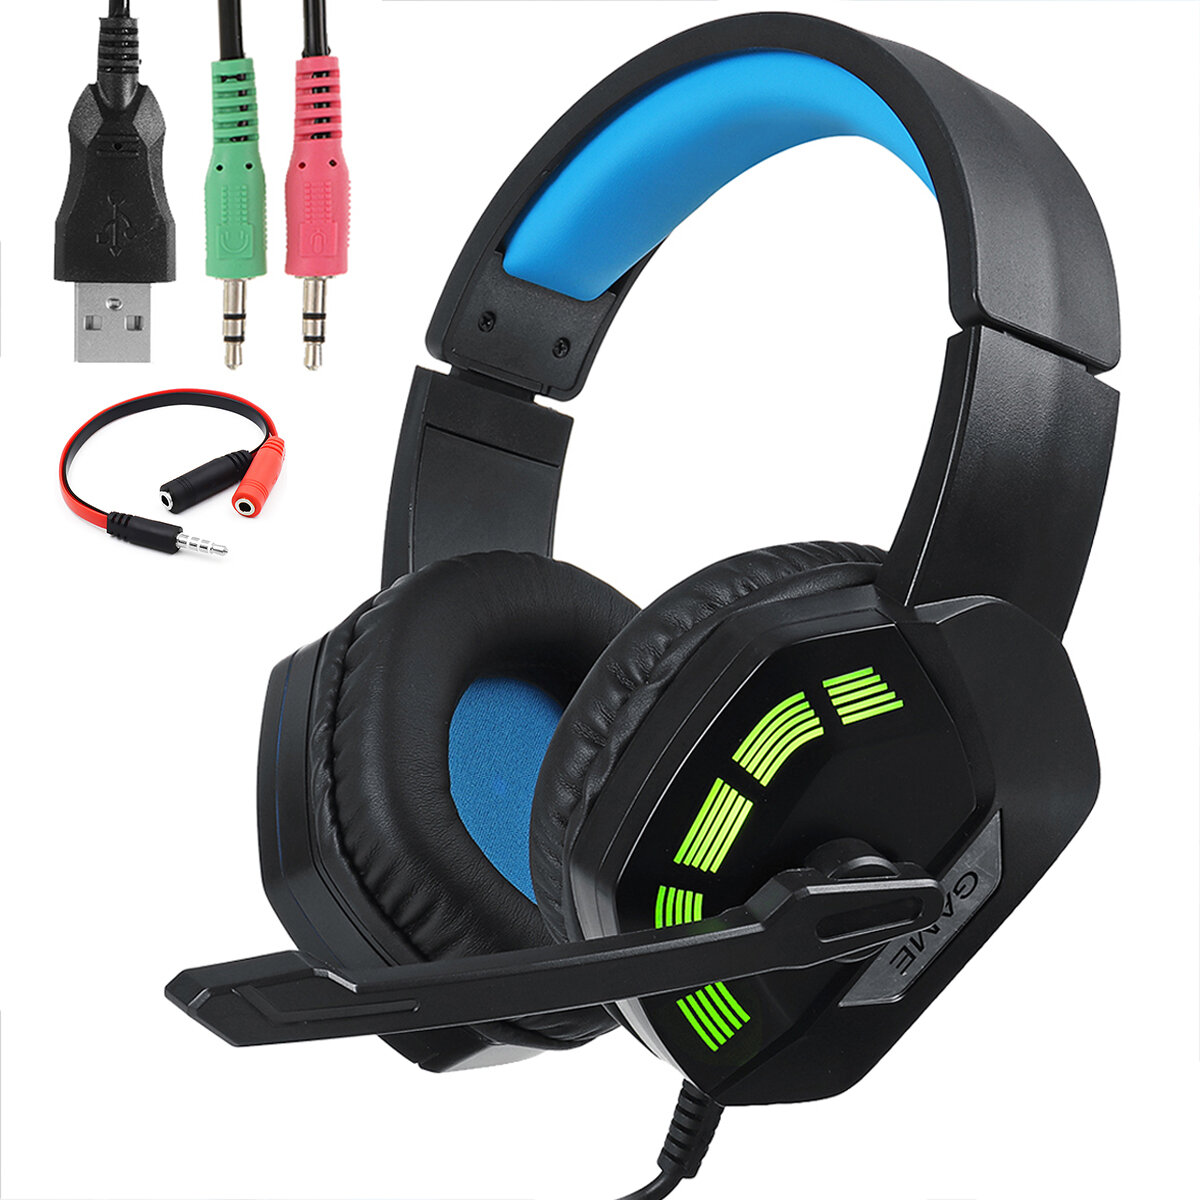 M1 Gaming Headset Surround Sound Music Earphones USB 7.1 & 3.5mm Wired RGB Backlight Game Headphones with Mic COD